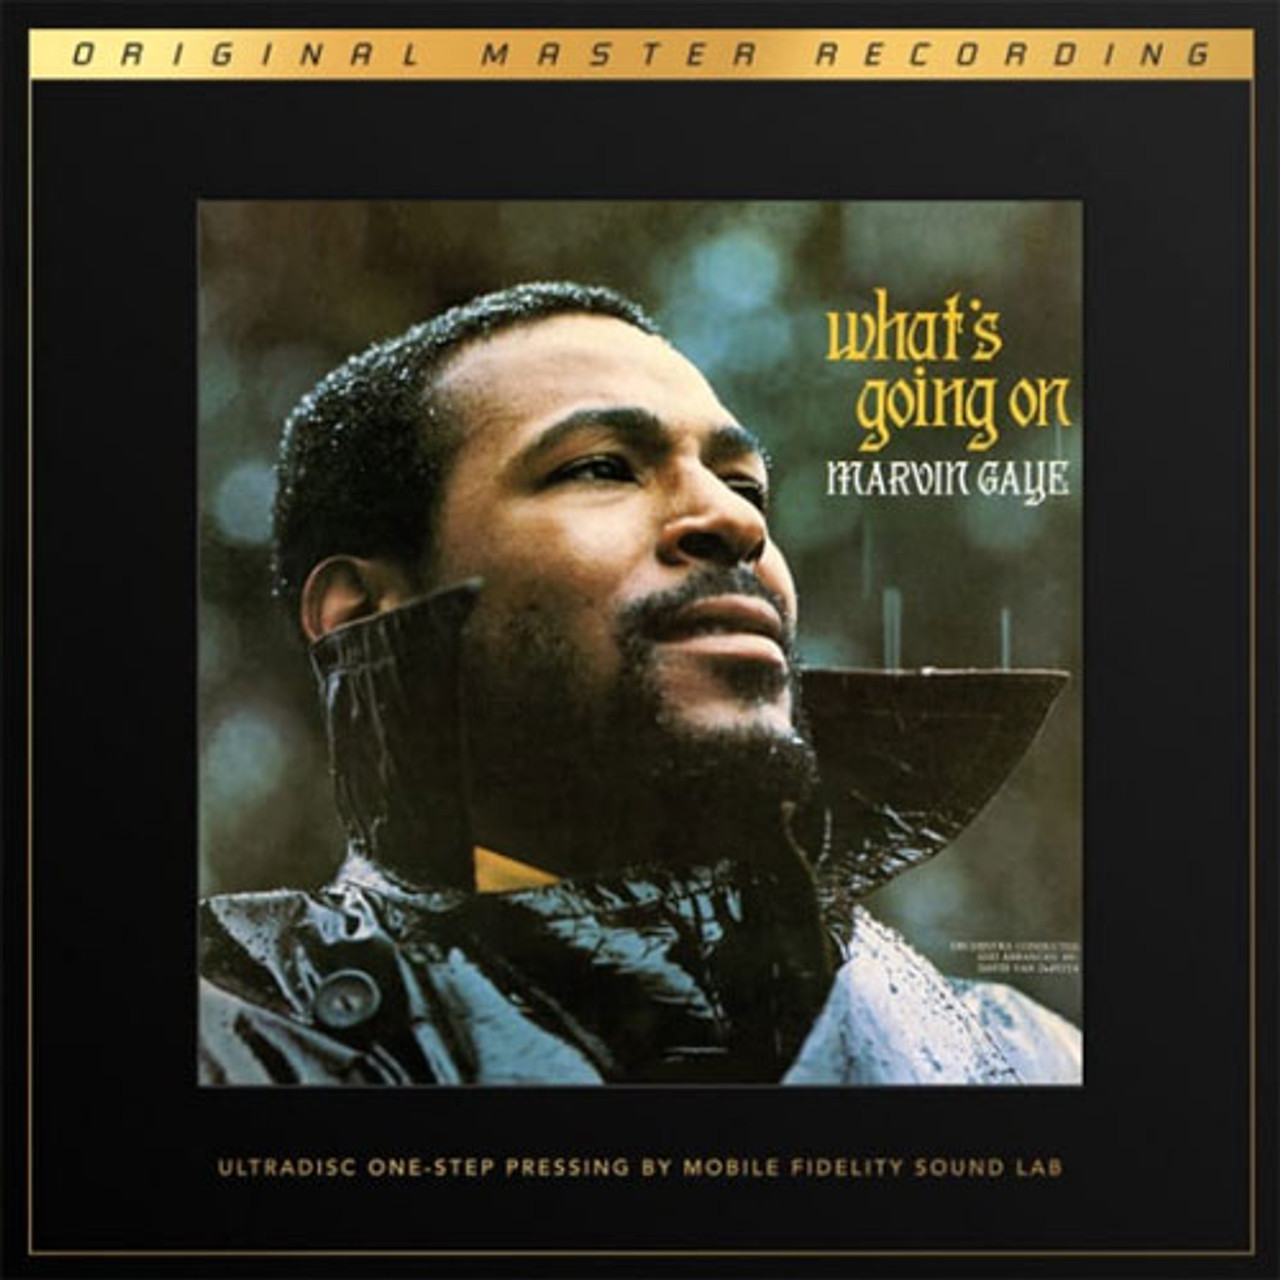 Marvin Gaye: What's Going On Vinyl. Norman Records UK